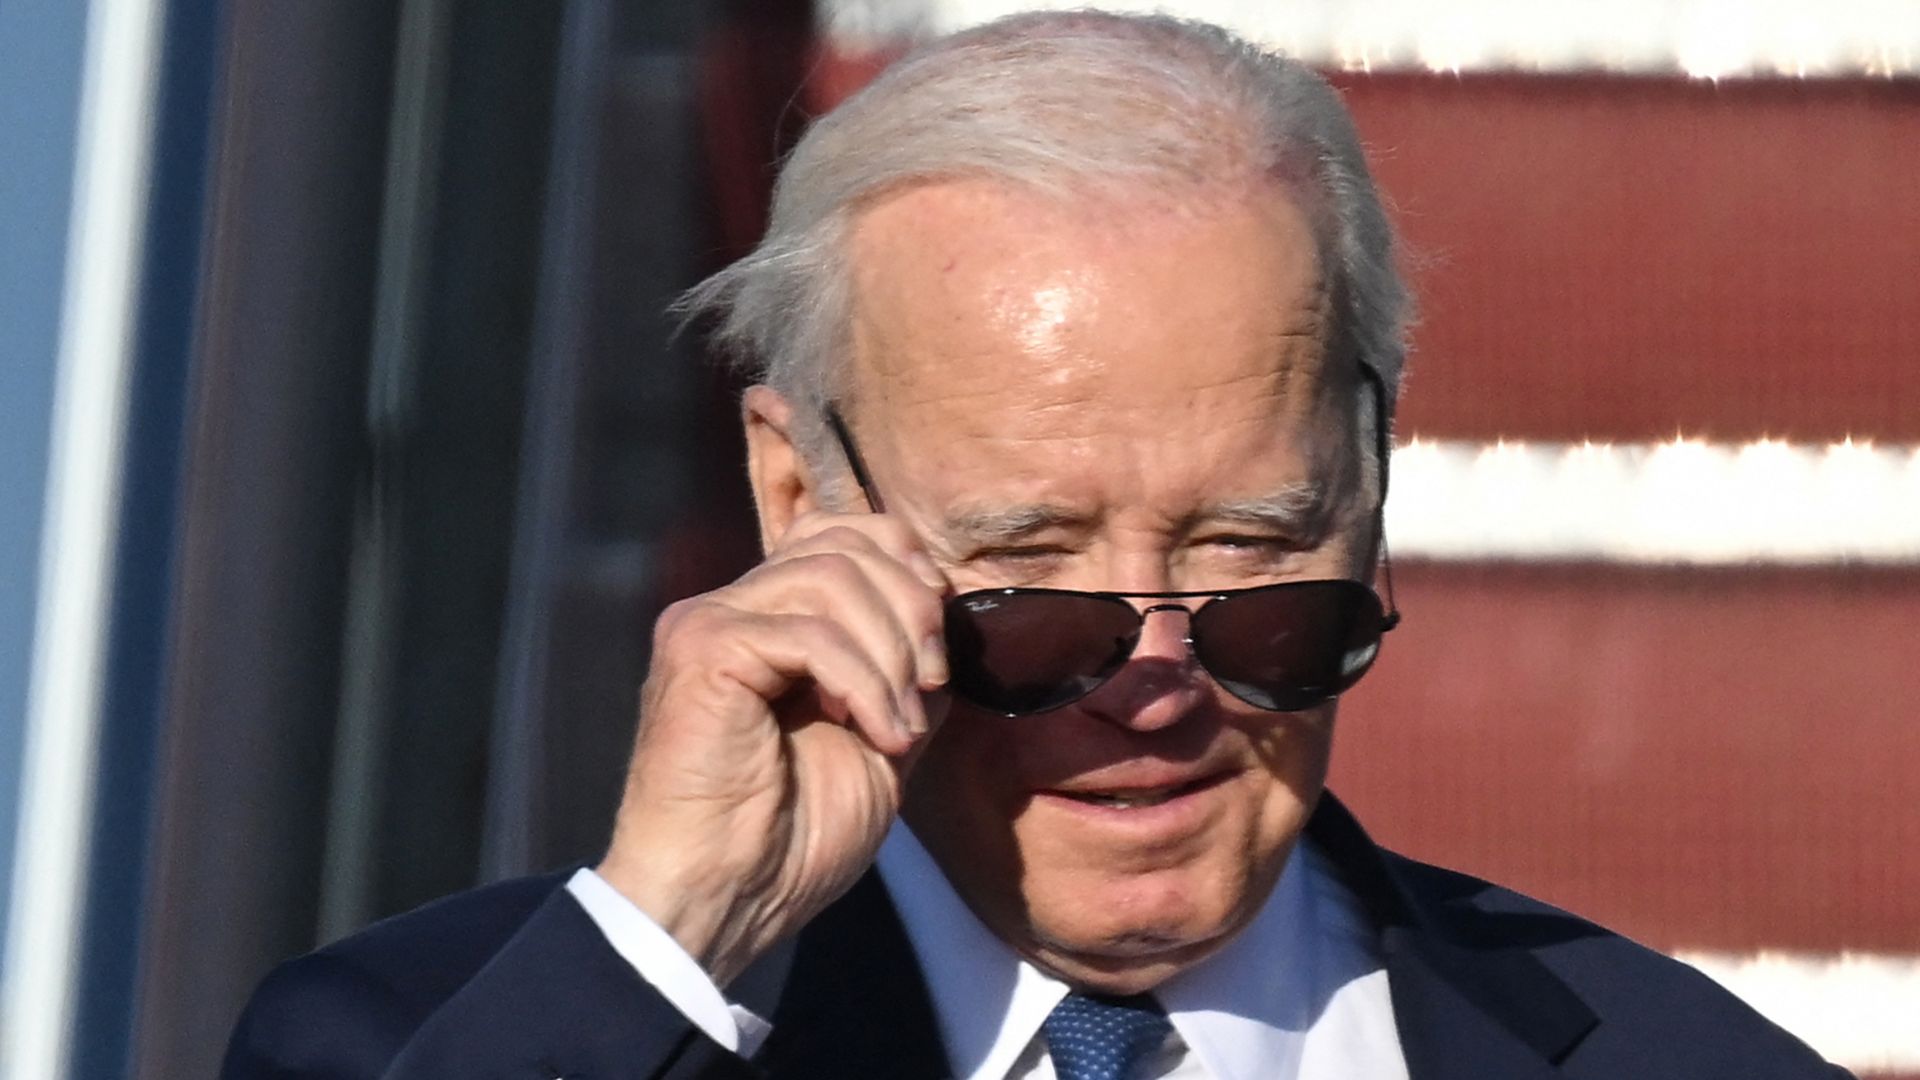 Majority of Democrats and two-thirds of voters believe Biden should not run for re-election in 2024.